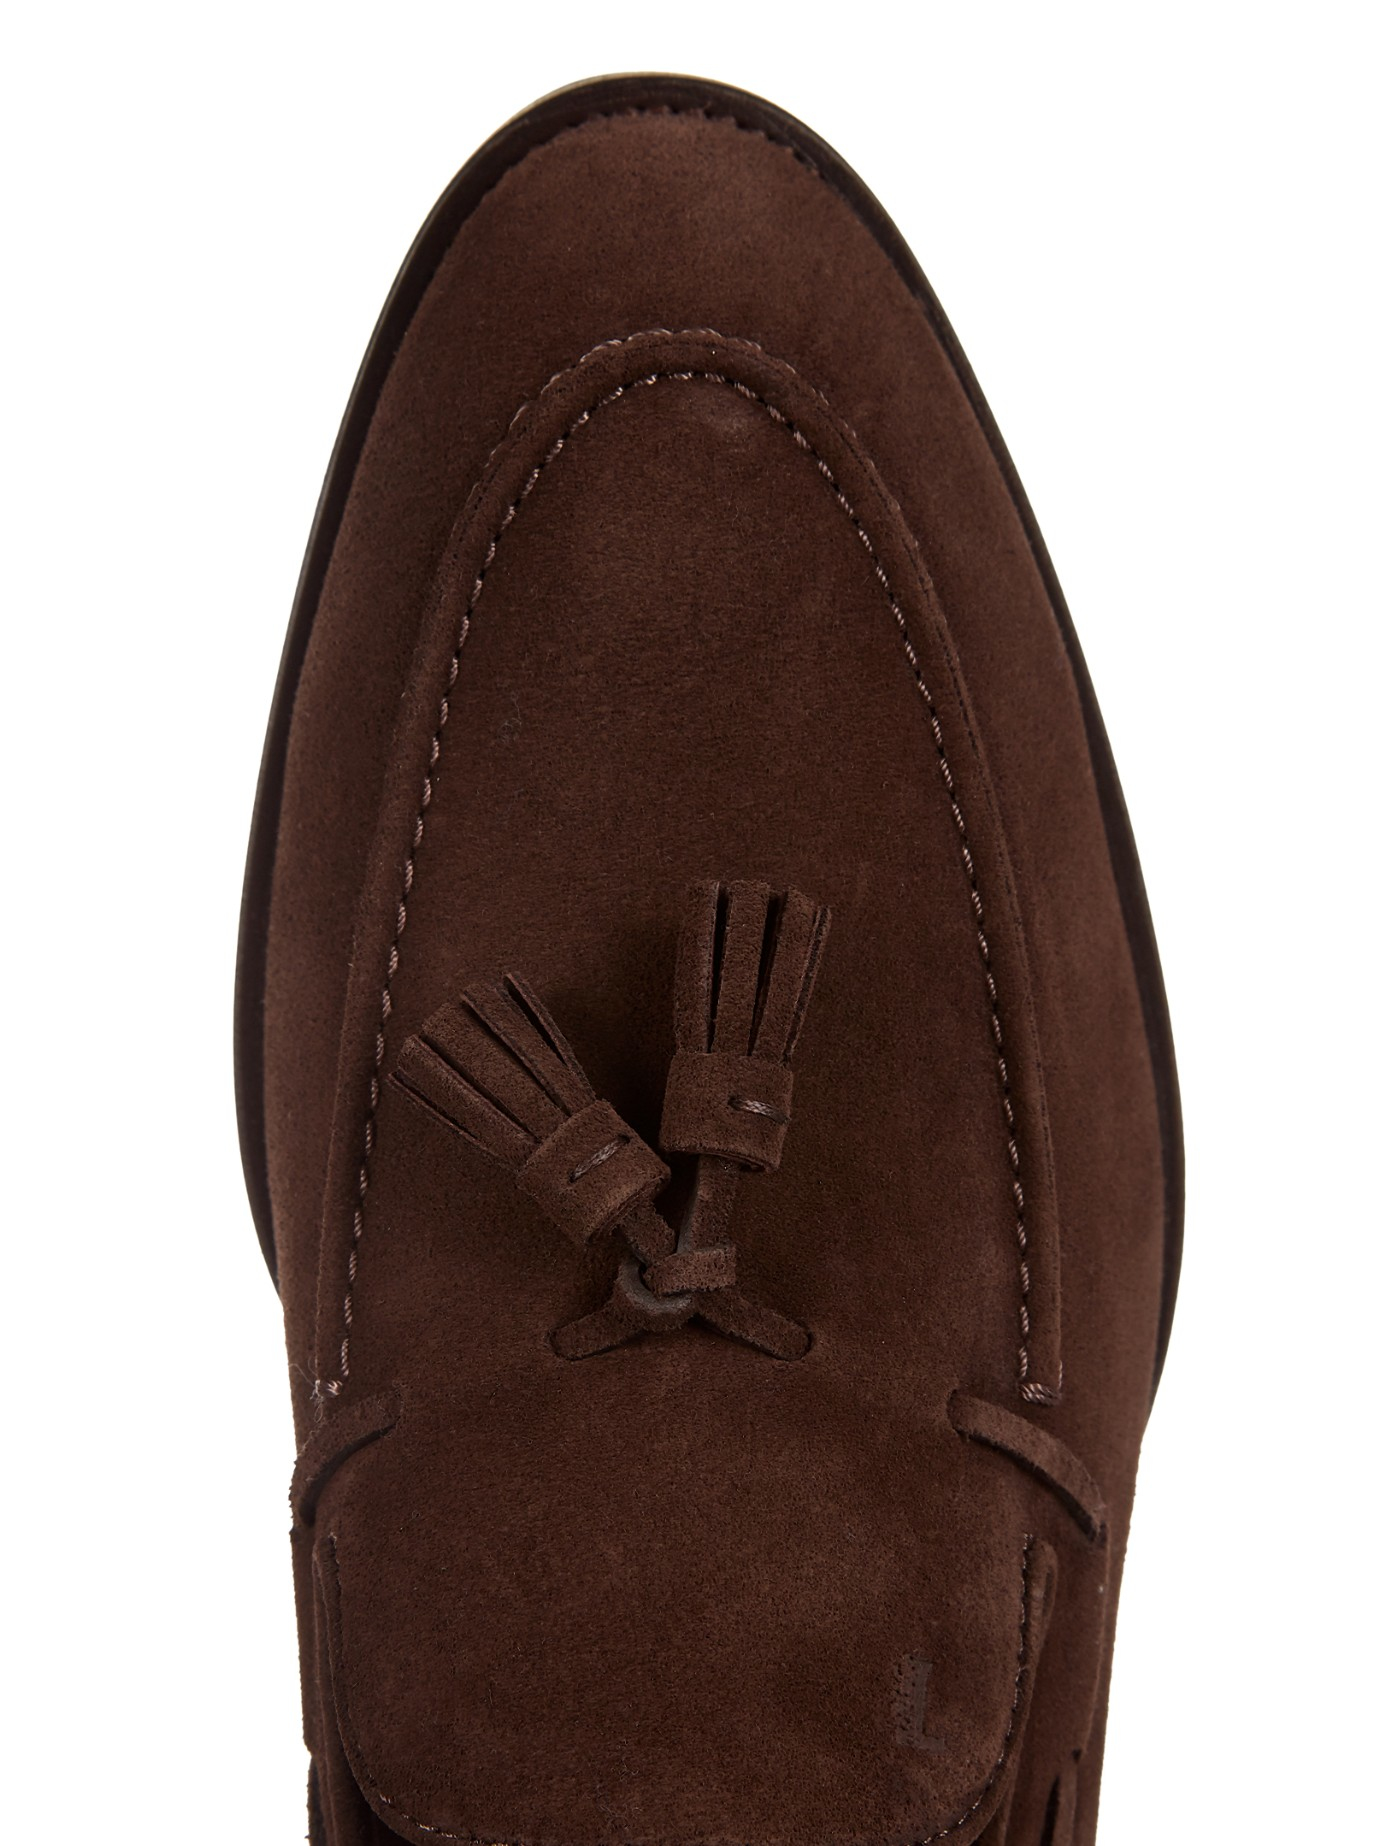 Tod's Tassel Suede Loafers in Brown for Men - Lyst